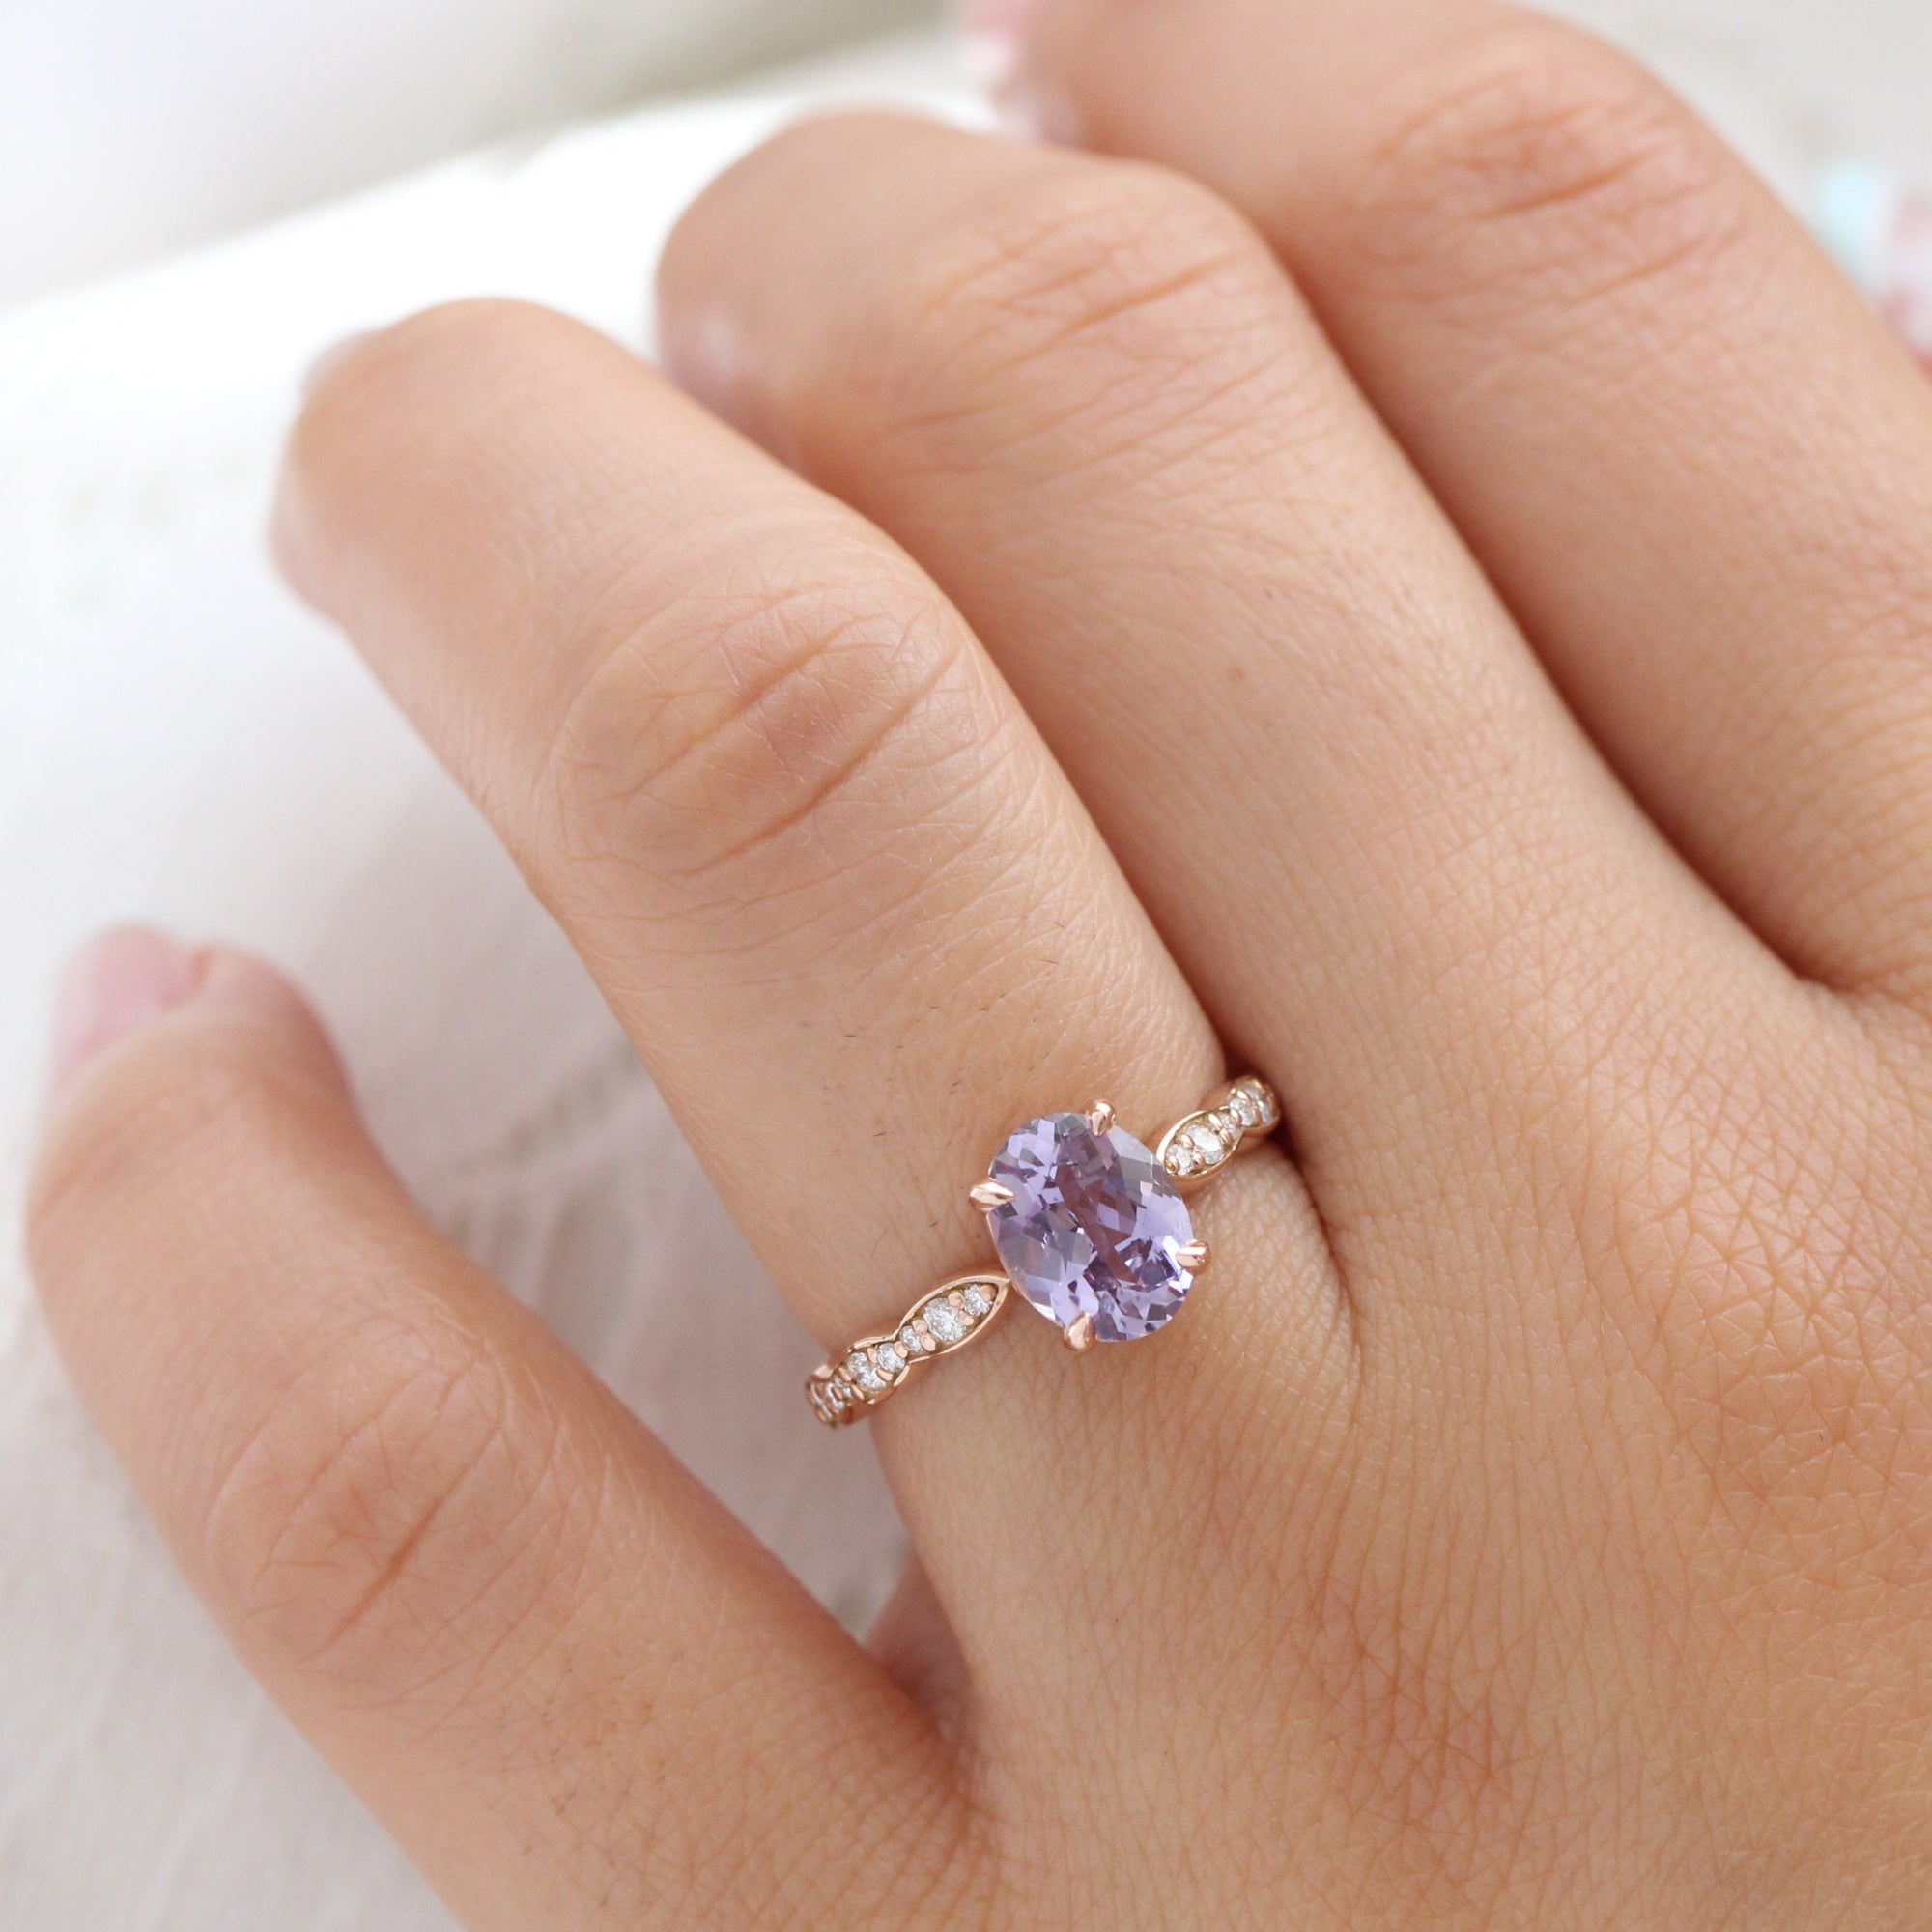 Oval lavender sapphire ring rose gold scalloped diamond band low set engagement ring la more design jewelry